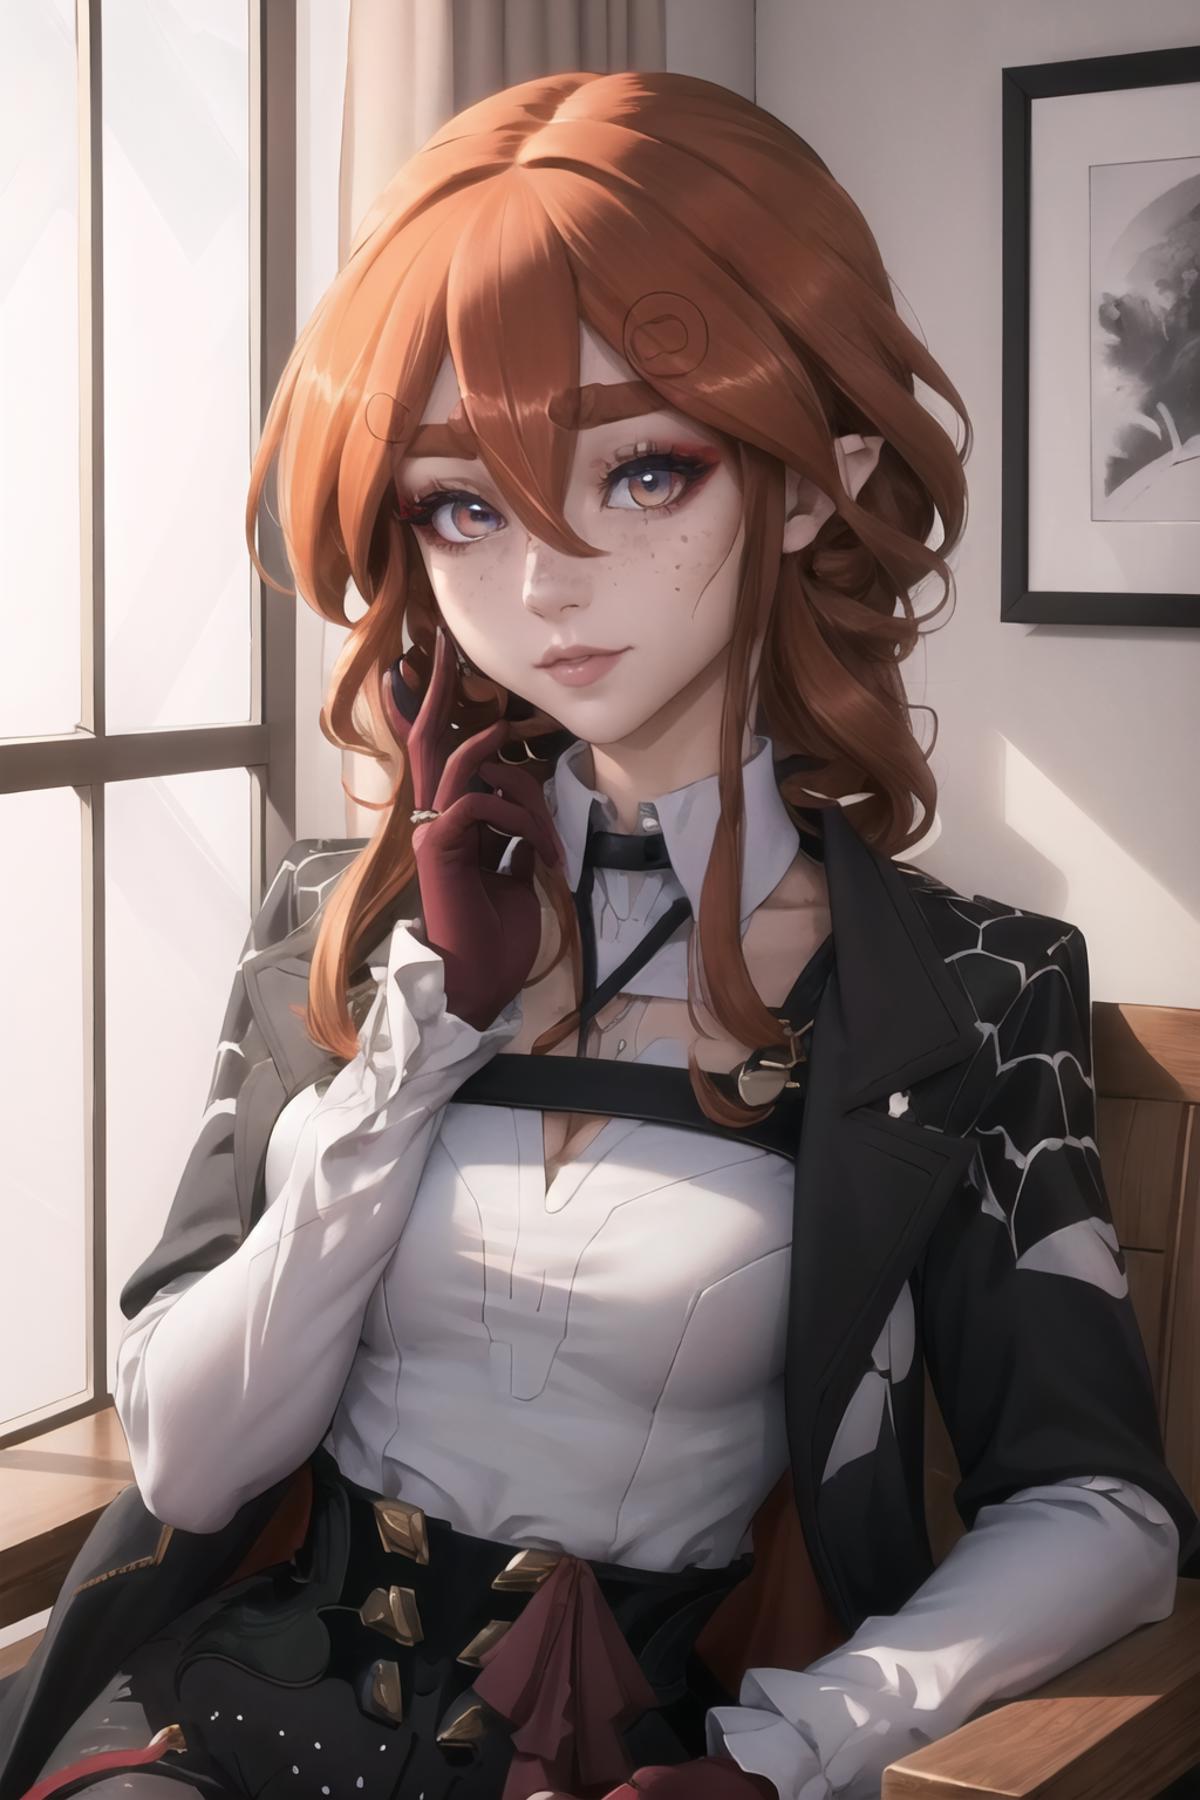 Kafka's Outfit | Outfit LoRA image by FallenIncursio